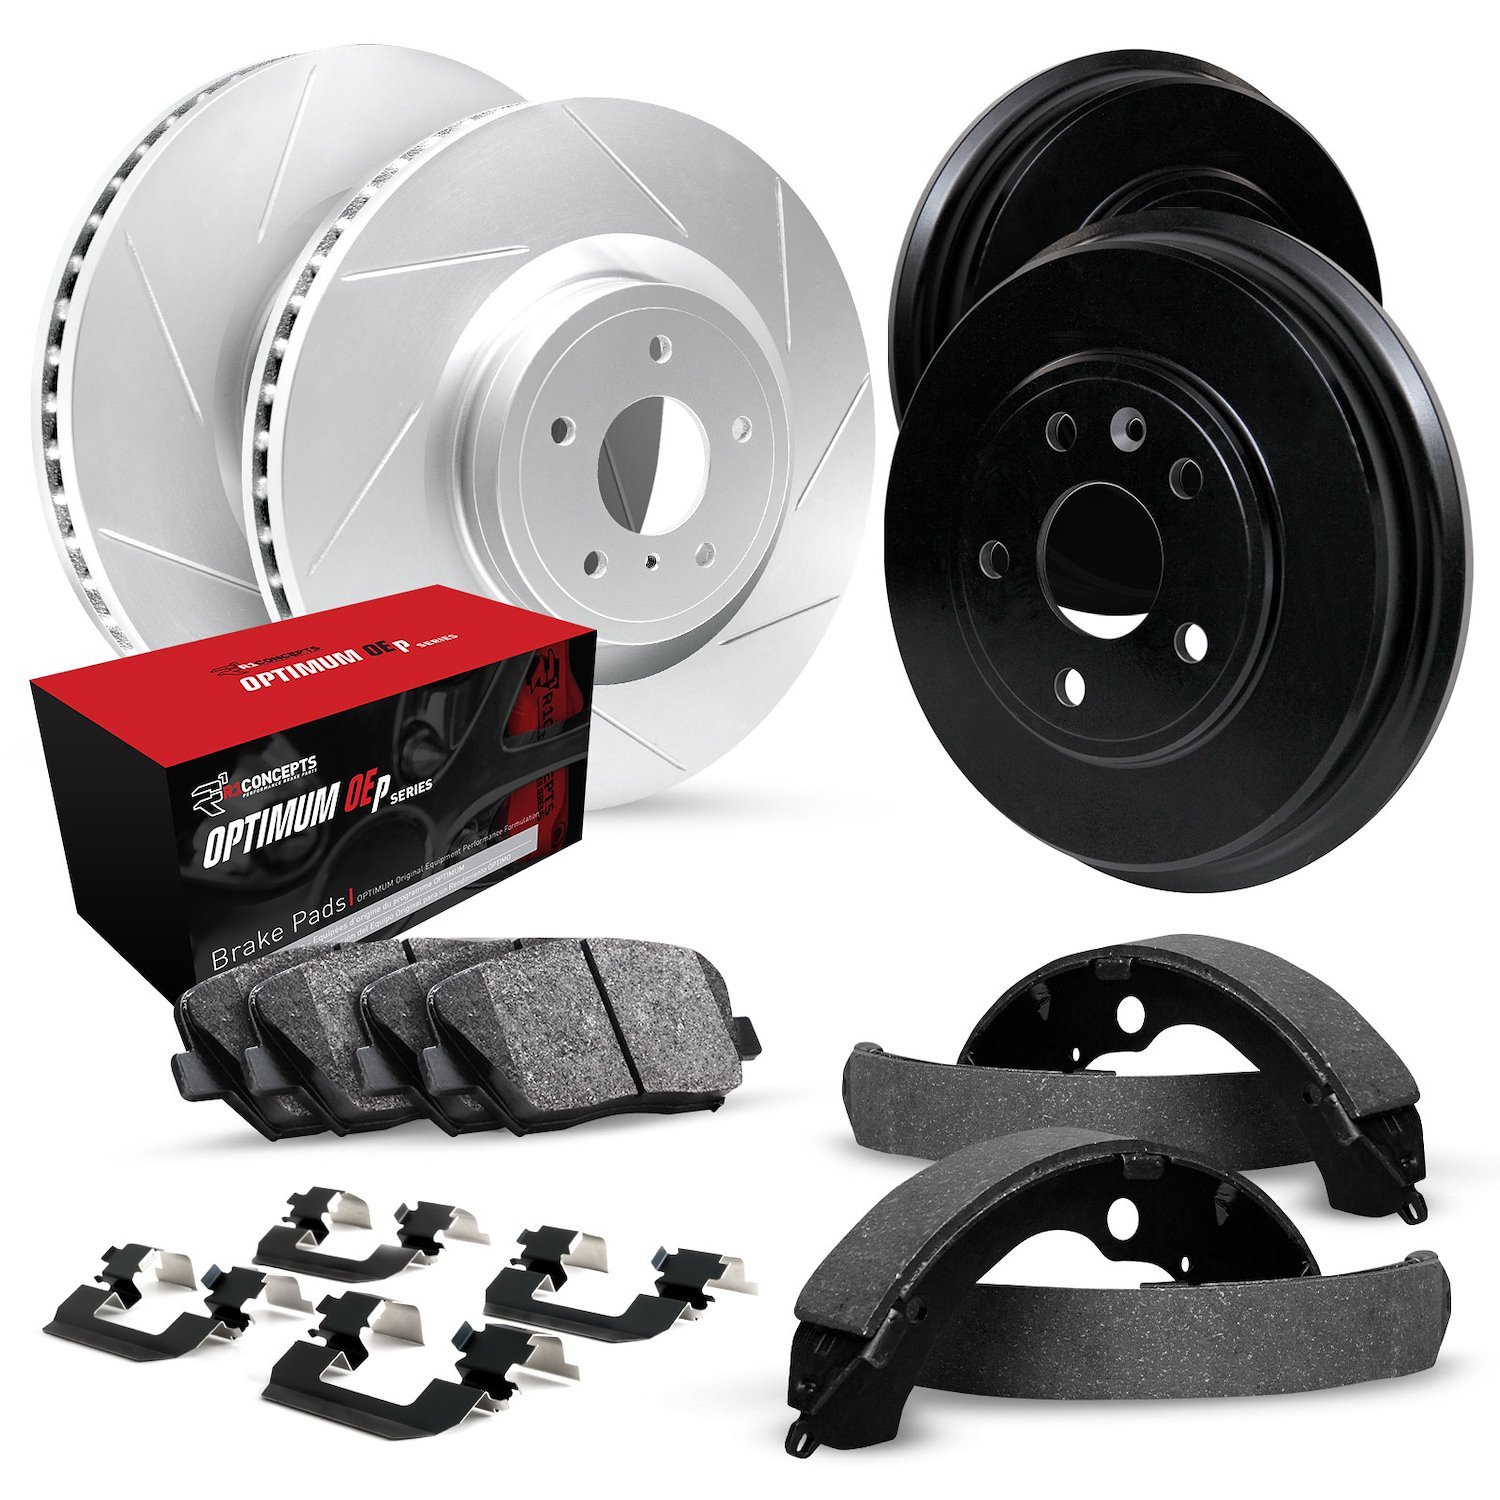 GEO-Carbon Slotted Brake Rotor & Drum Set w/Optimum OE Pads, Shoes, & Hardware, 1991-1998 GM, Position: Front & Rear